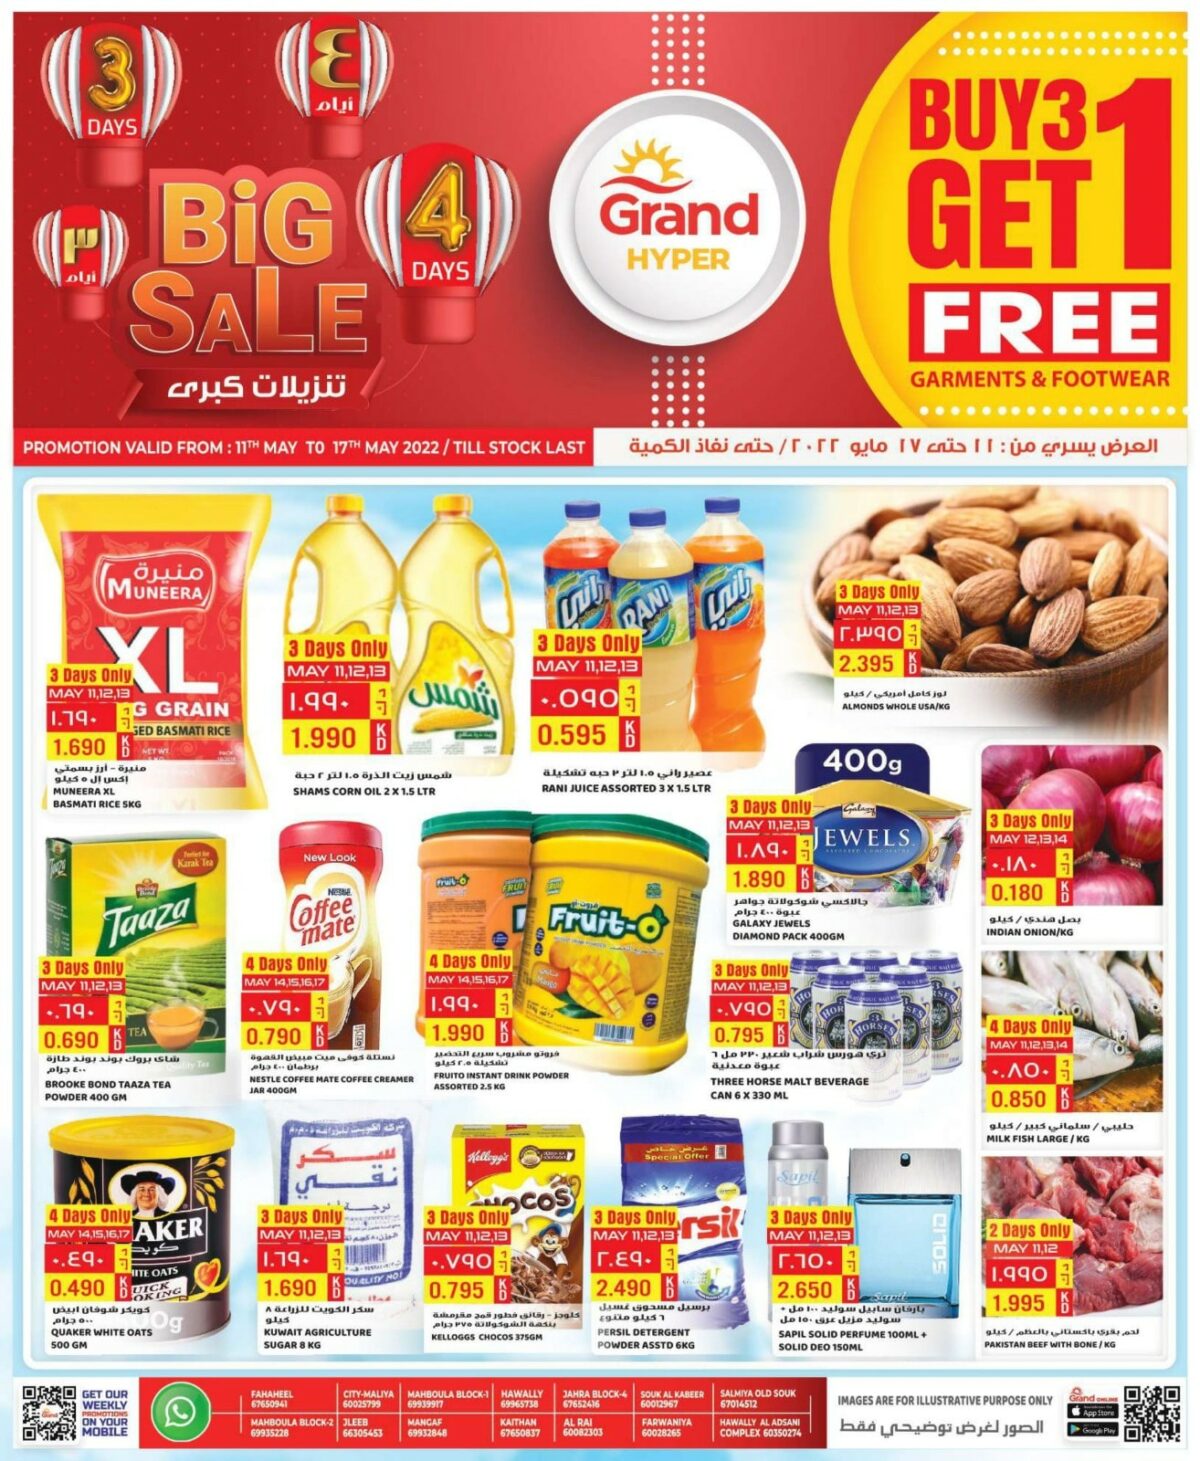 Grand Hypermarket Special Offers, iiQ8 weekly promotions 1